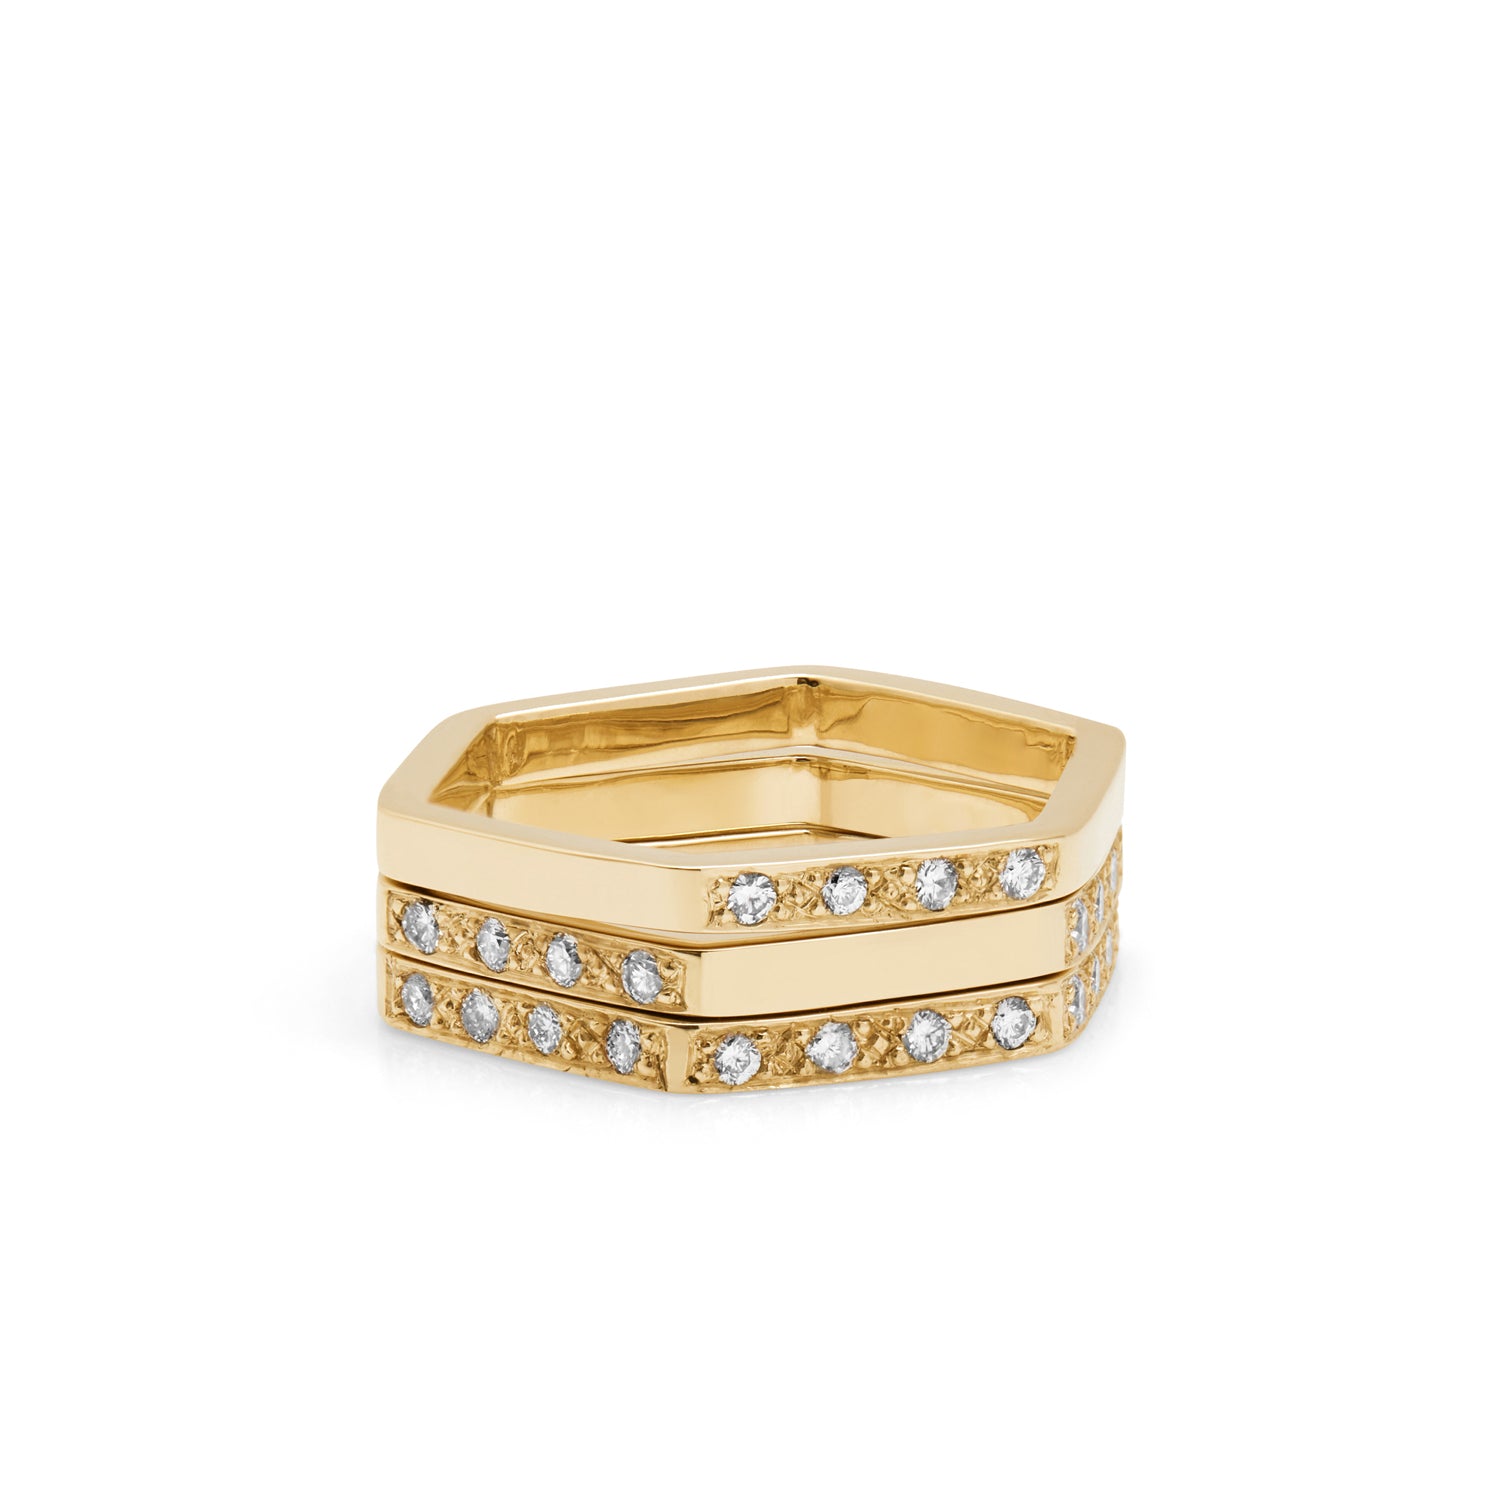 Hexagon Ring with Diamonds / 2 Sides - 18k Yellow Gold